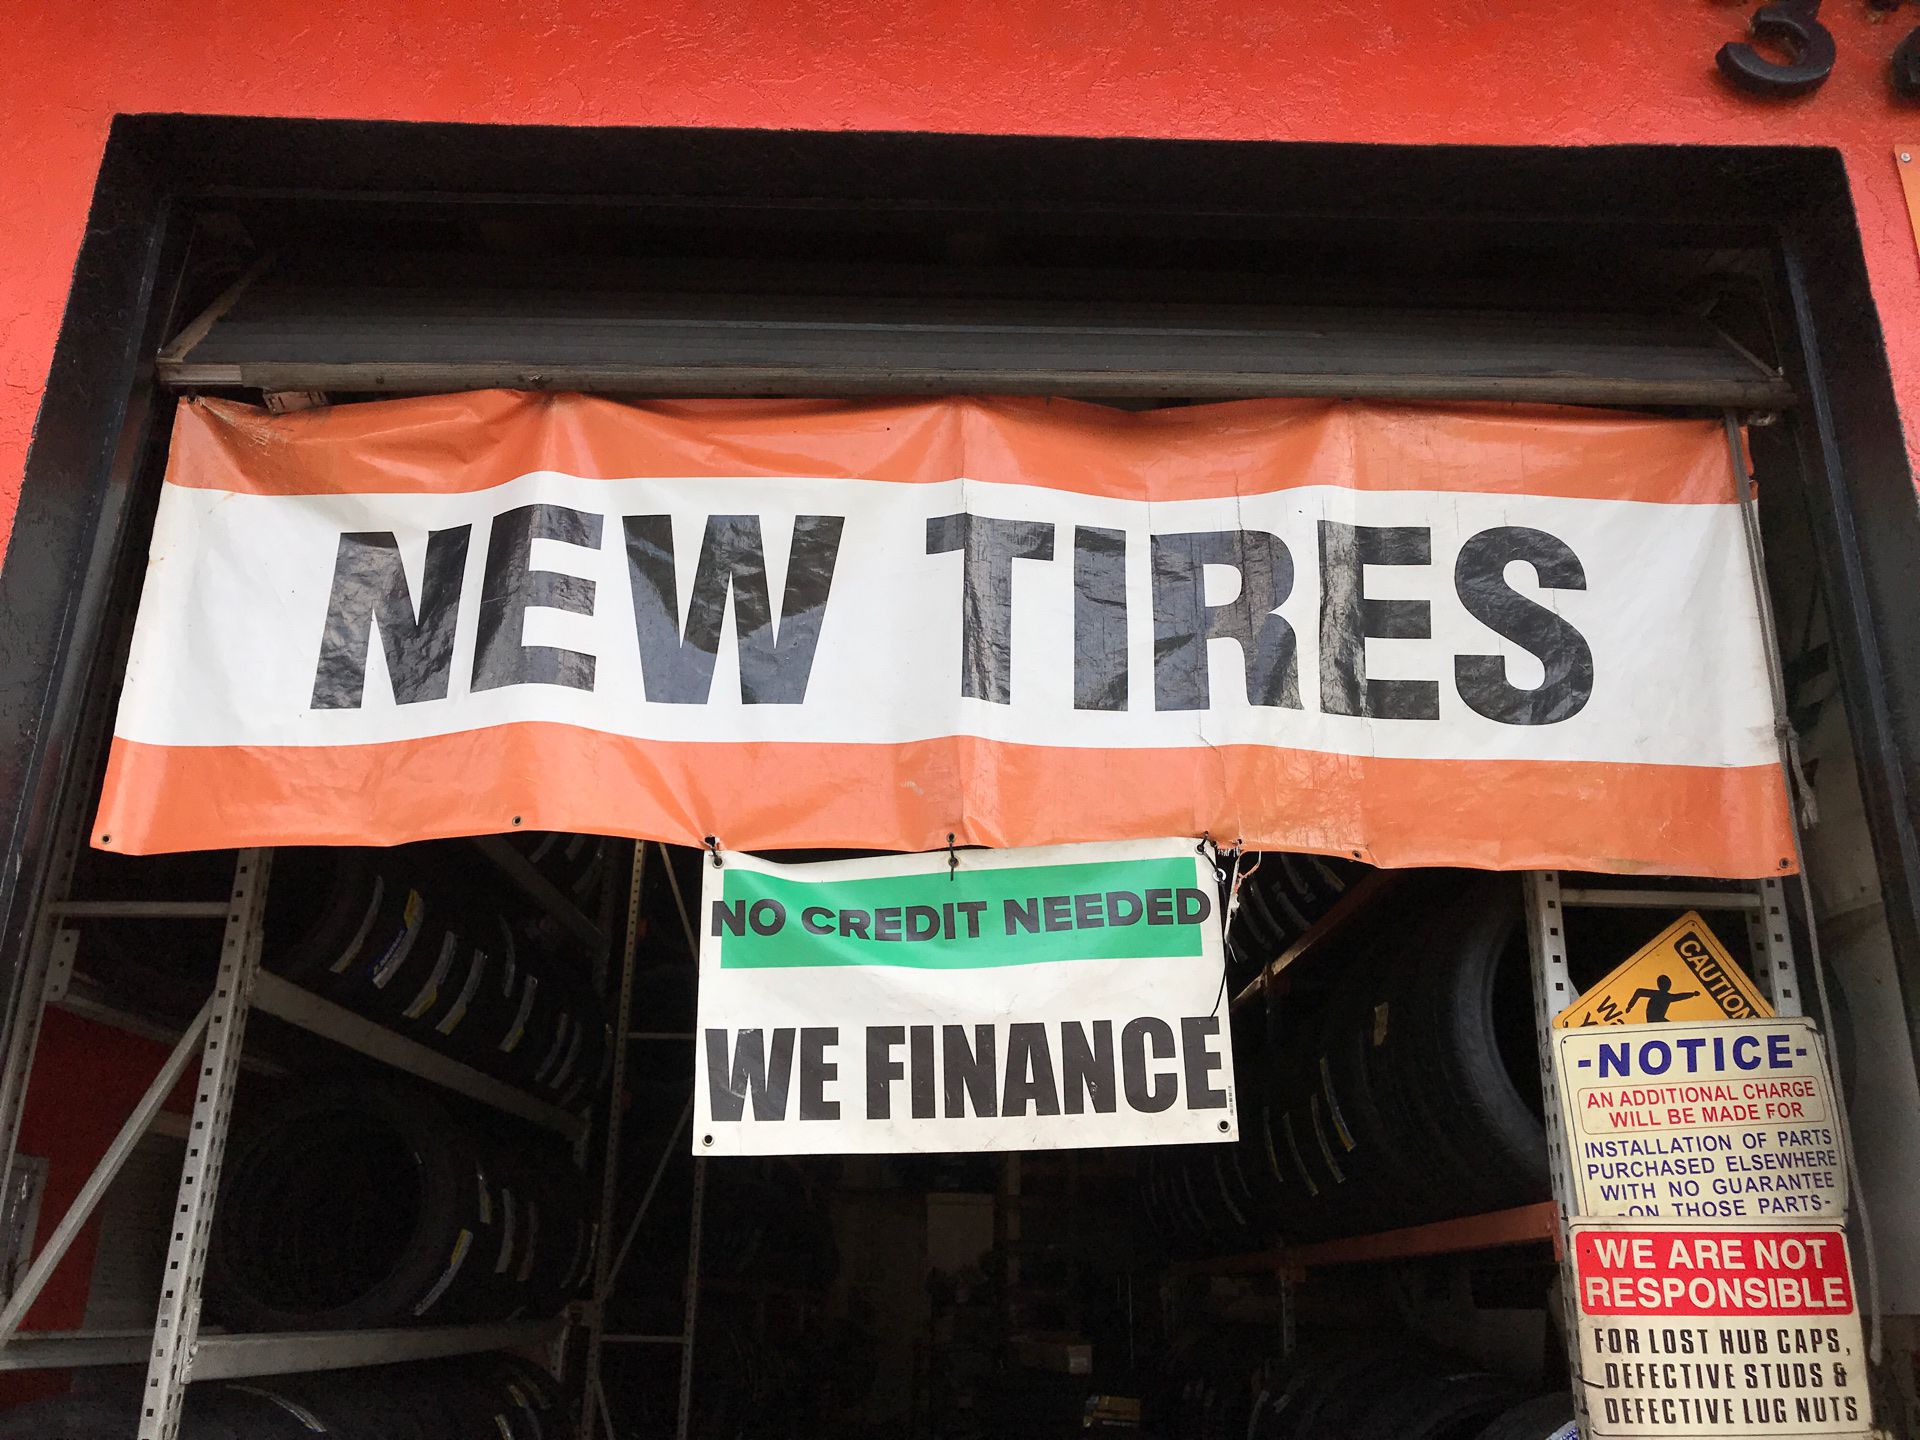 Commercial tire tires sale bobcat forklift industrial agricultural farm we do it all